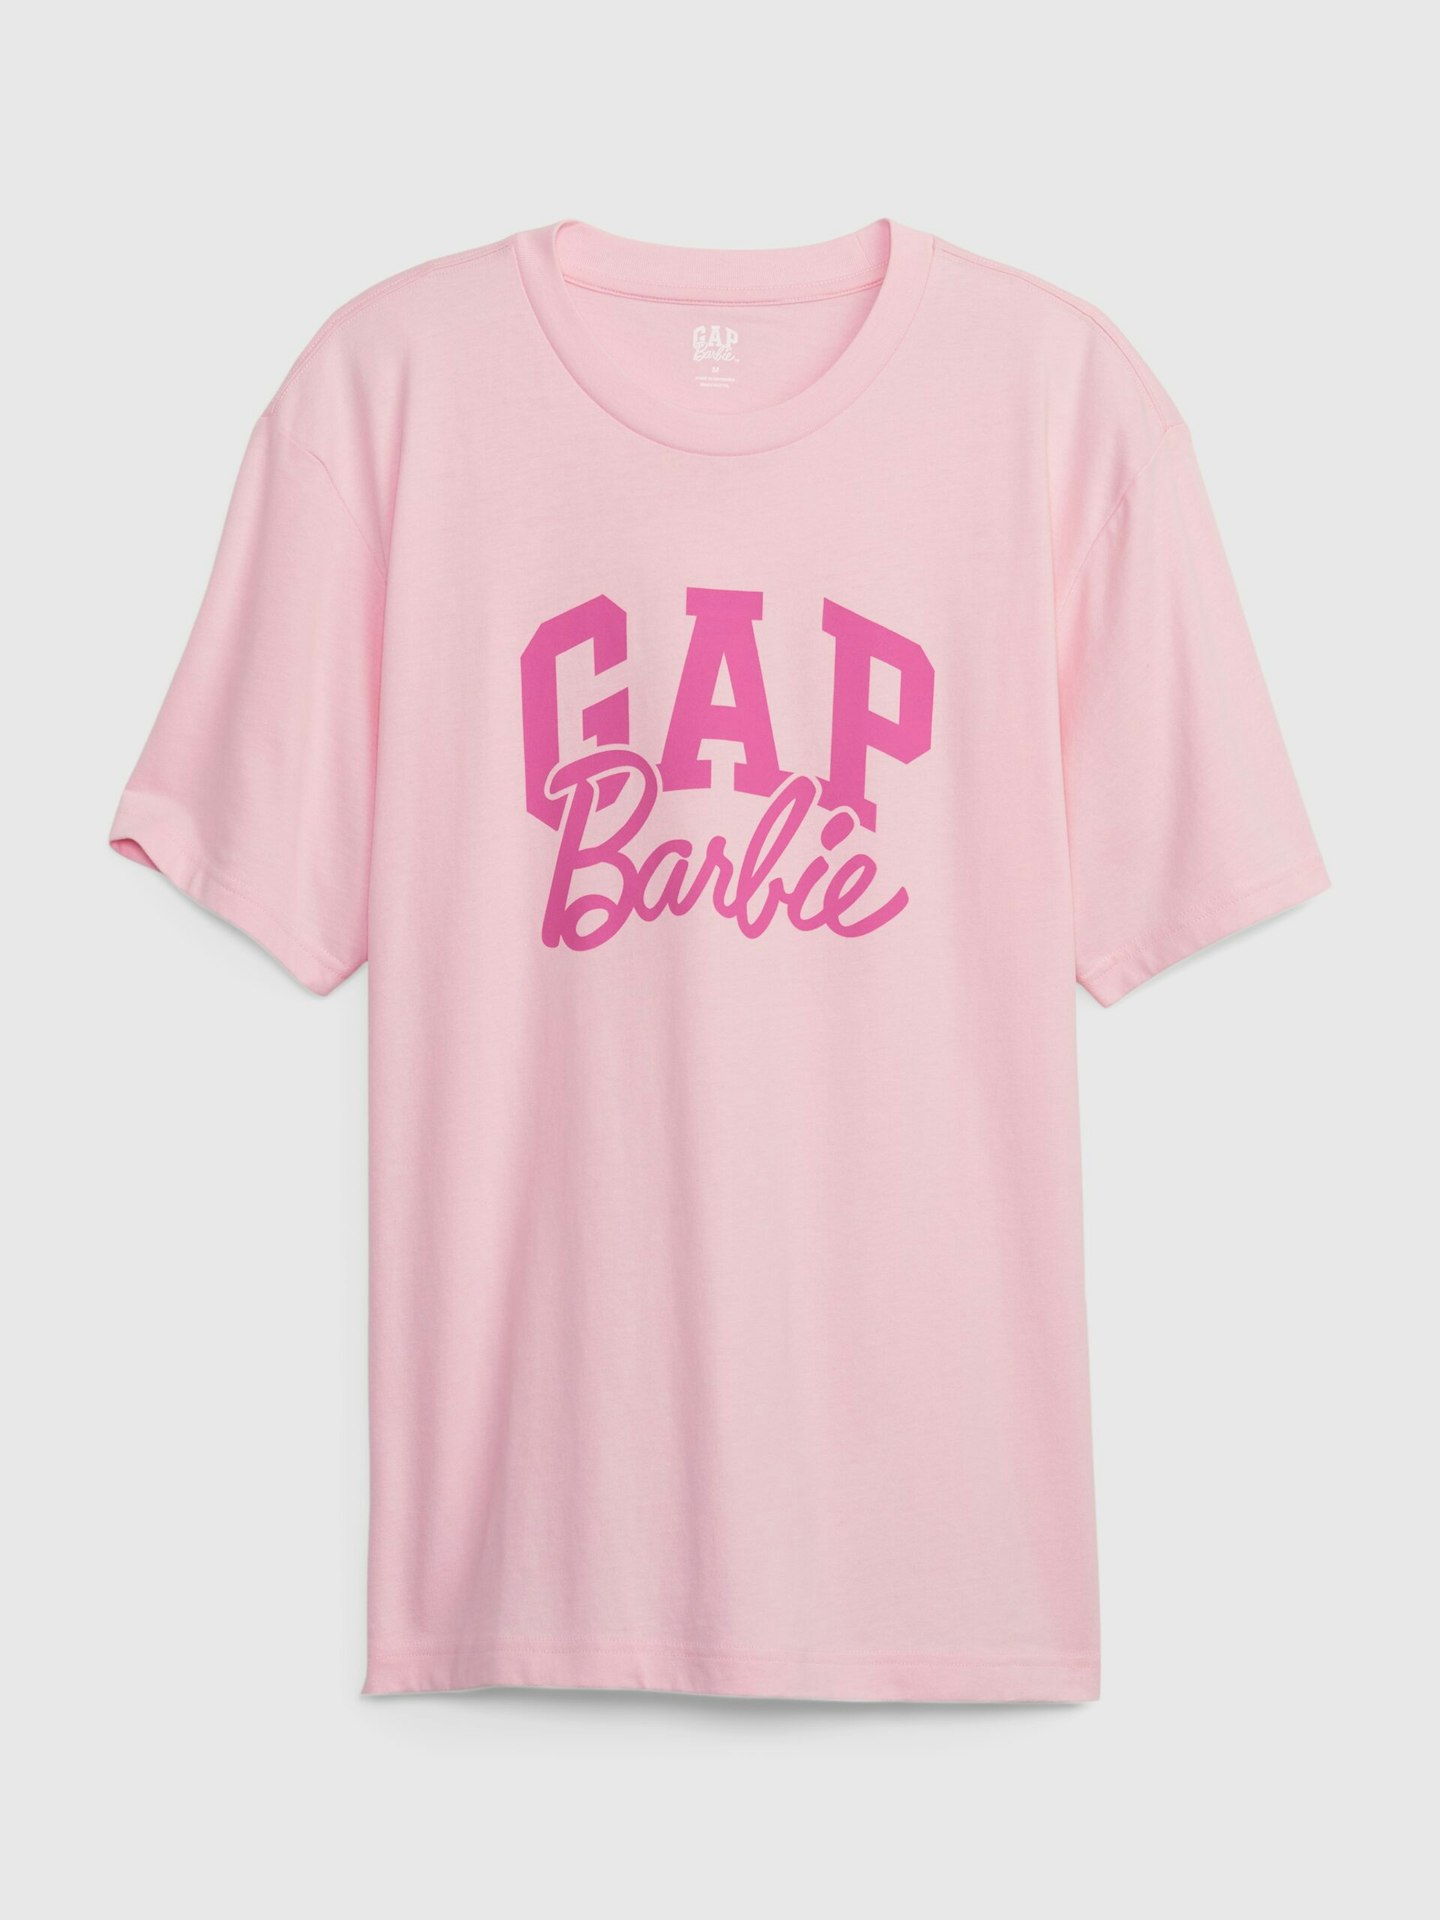 The Gap x Barbie Collection Is Here | Fashion | Grazia